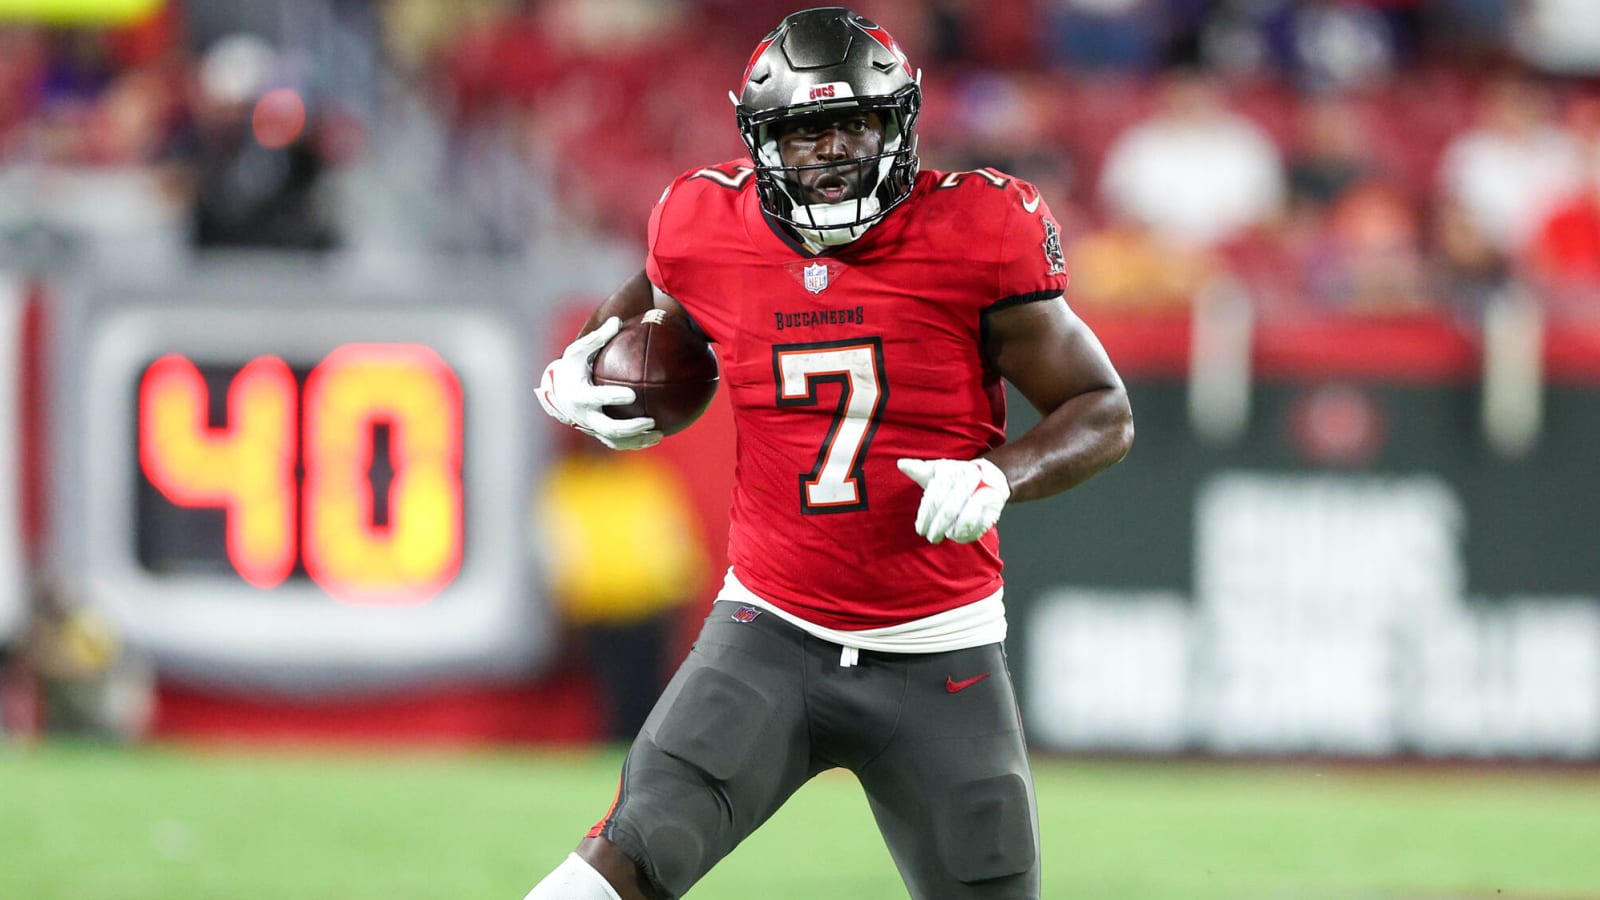 Leonard Fournette emerges from mini-funk to lead Bucs in rushing, receiving